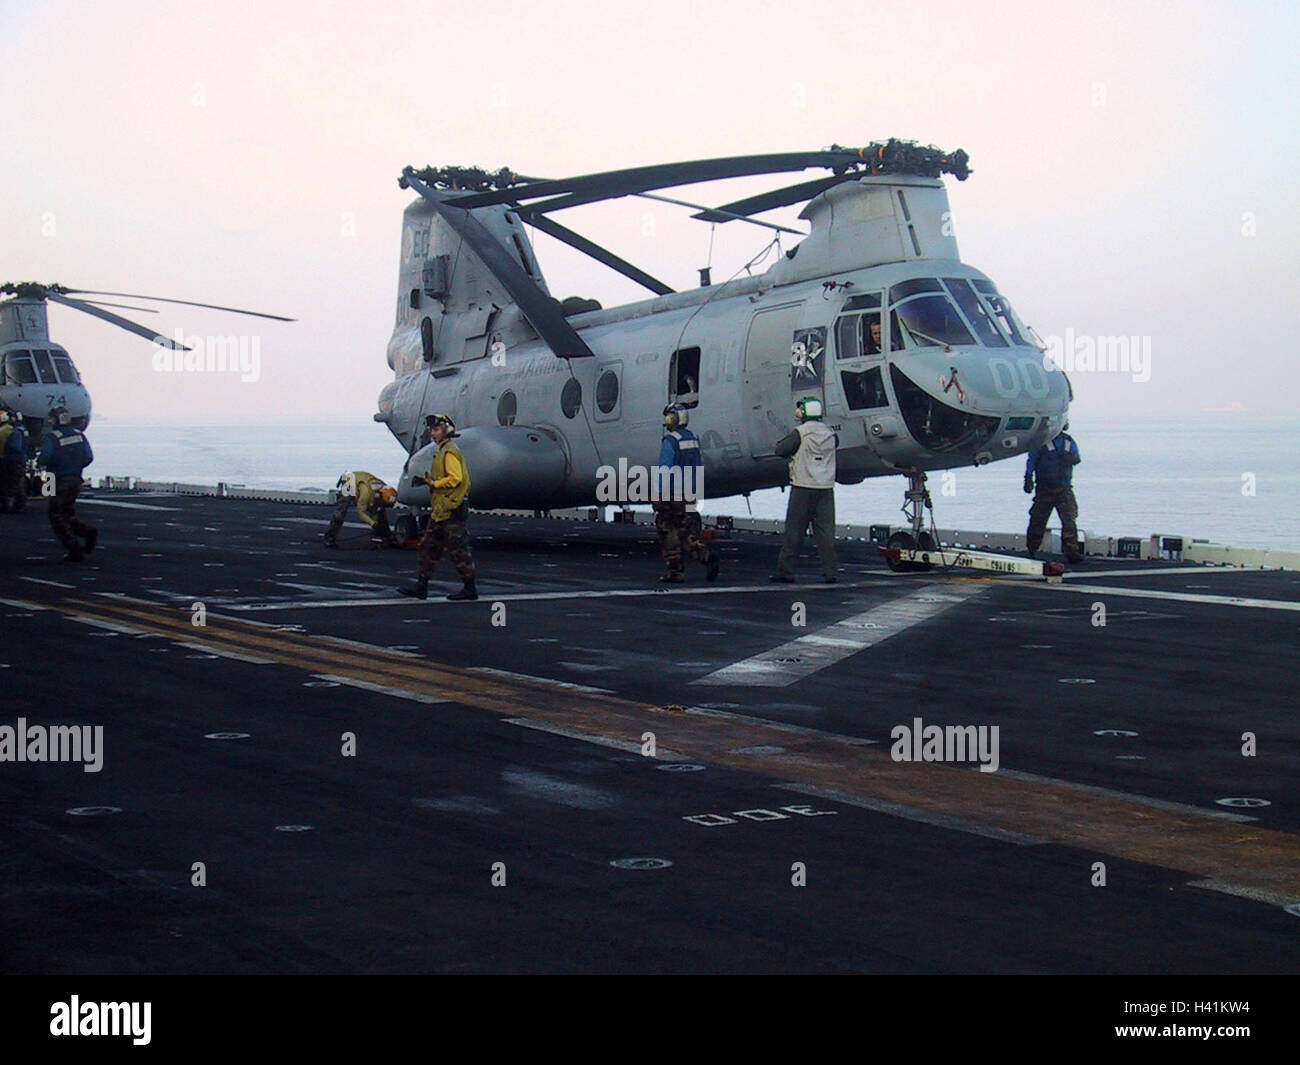 27th January 2003 Operation Enduring Freedom: a U.S. Marines CH-46E Sea Knight helicopter on the USS Nassau in the Persian Gulf. Stock Photo